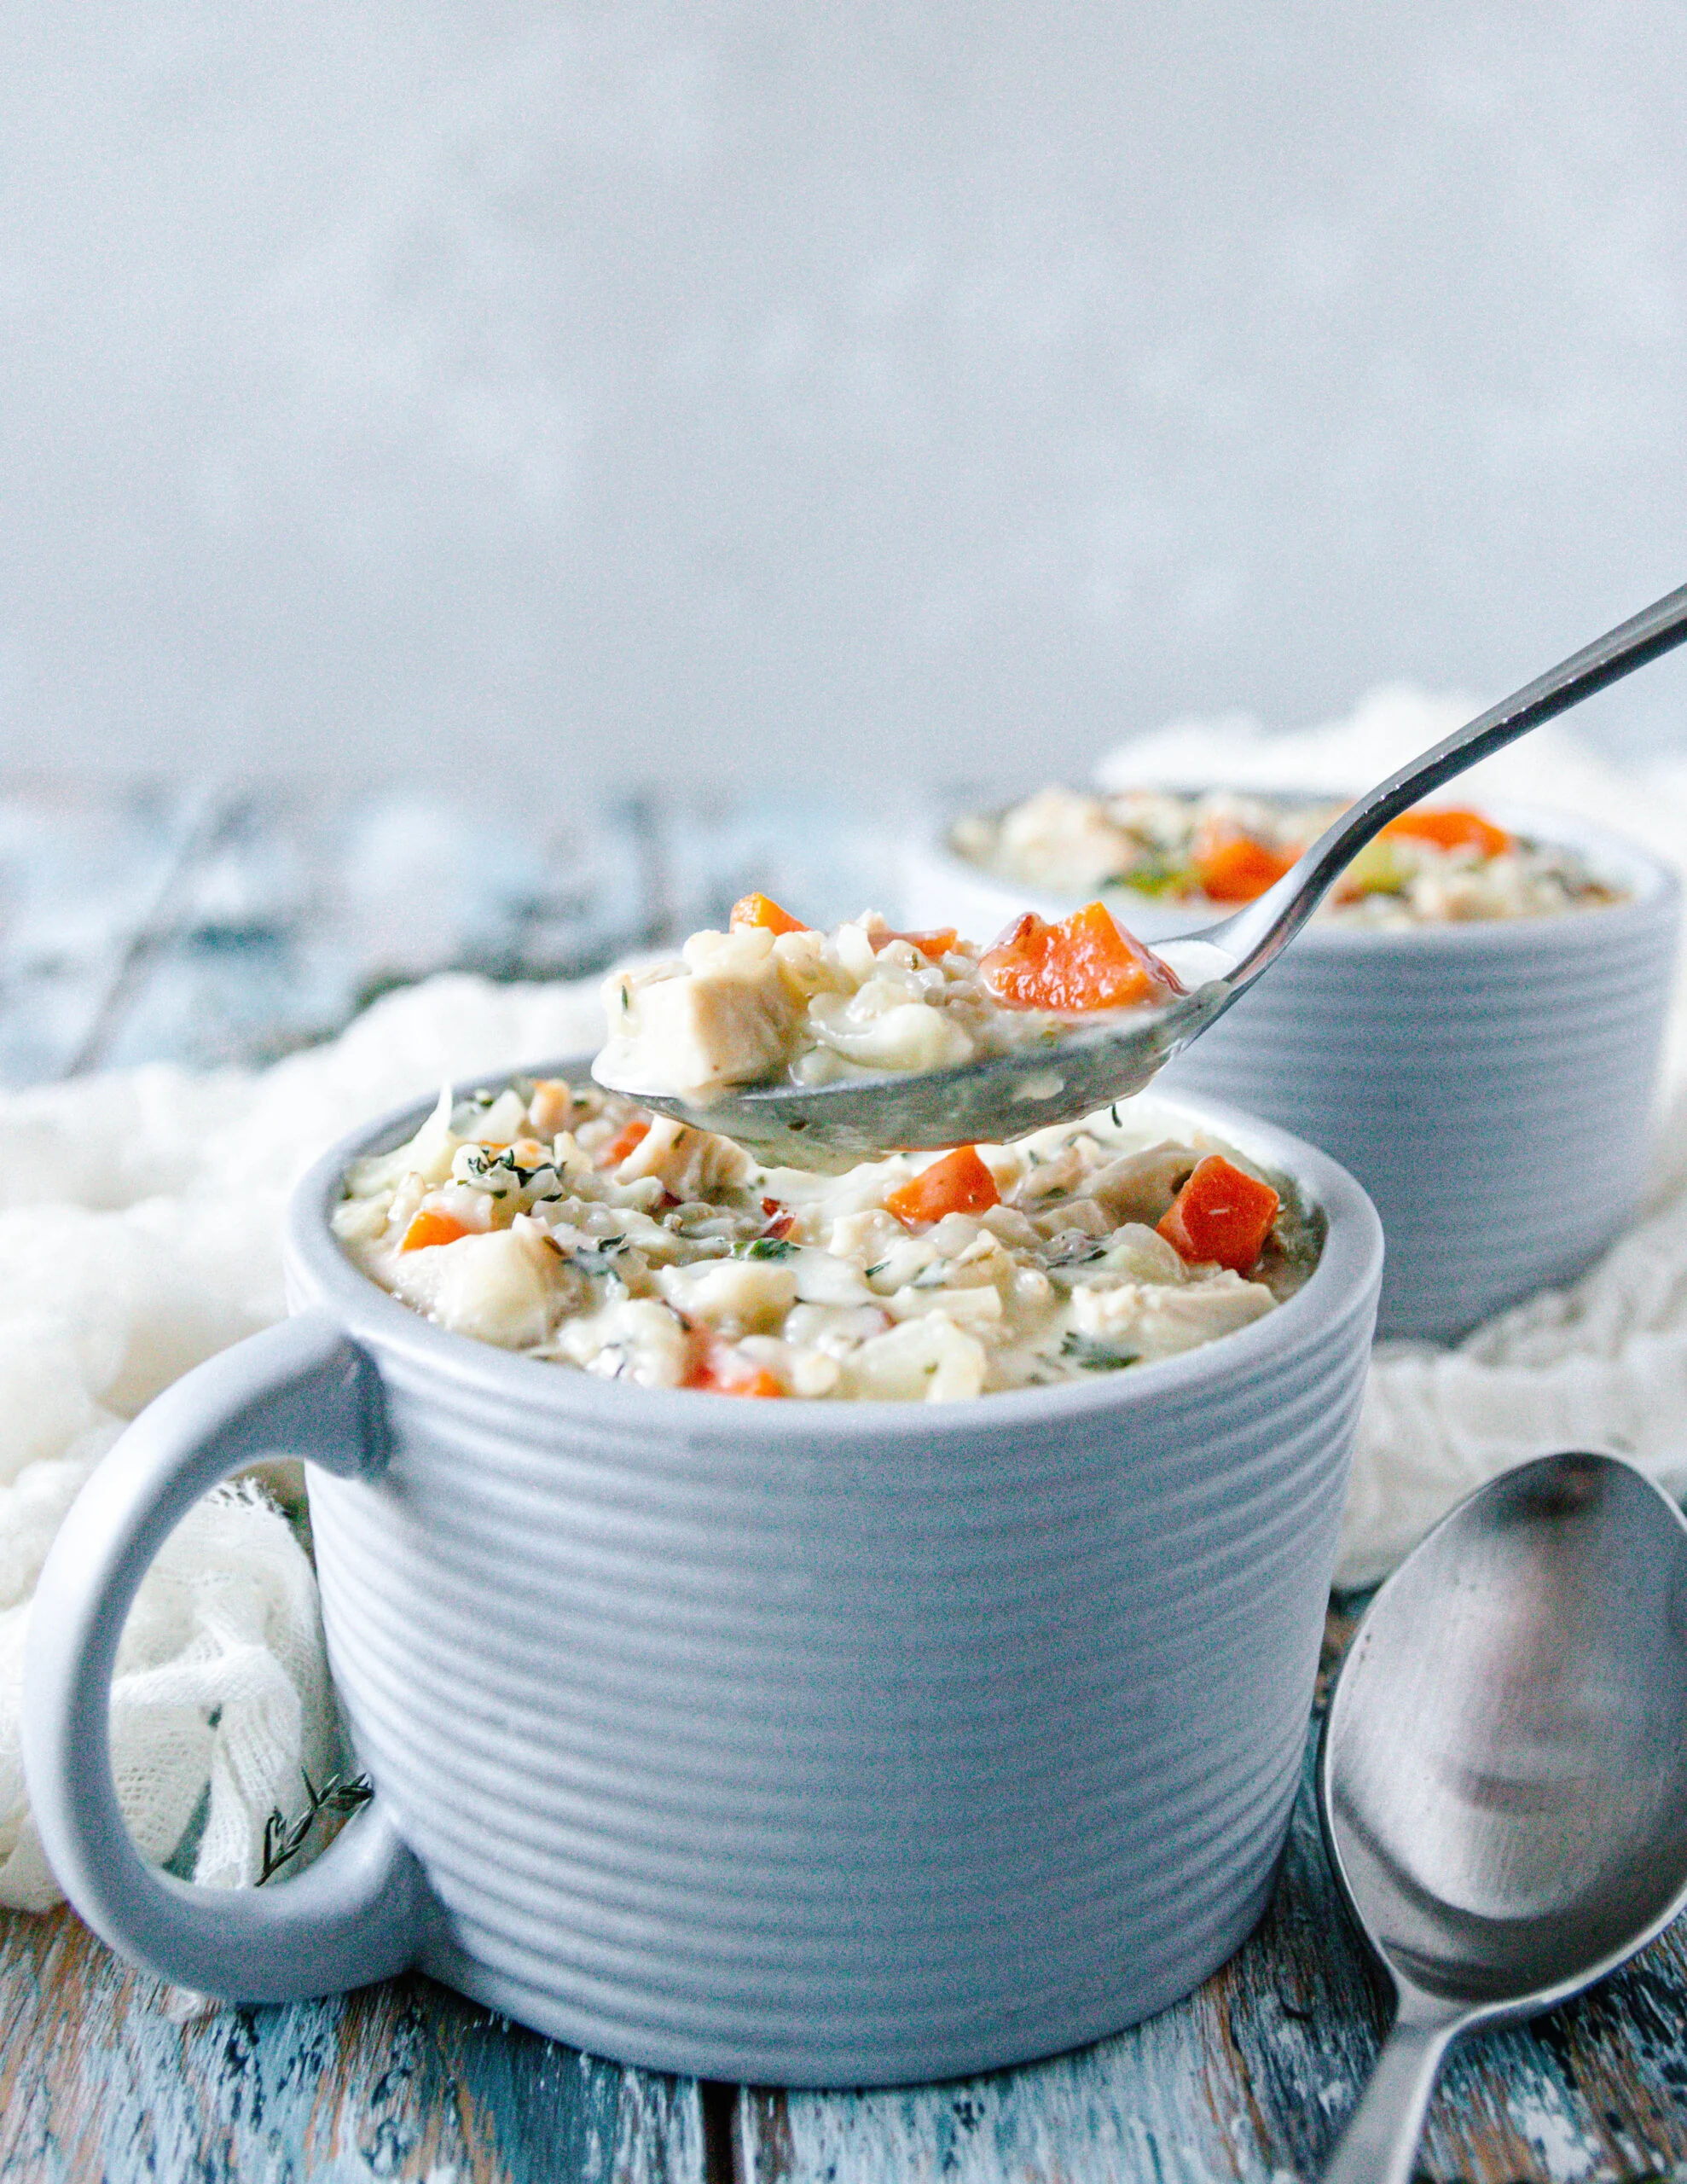 https://goodiegodmother.com/wp-content/uploads/2021/08/thanksgiving-leftovers-turkey-and-rice-soup-scaled.jpg.webp